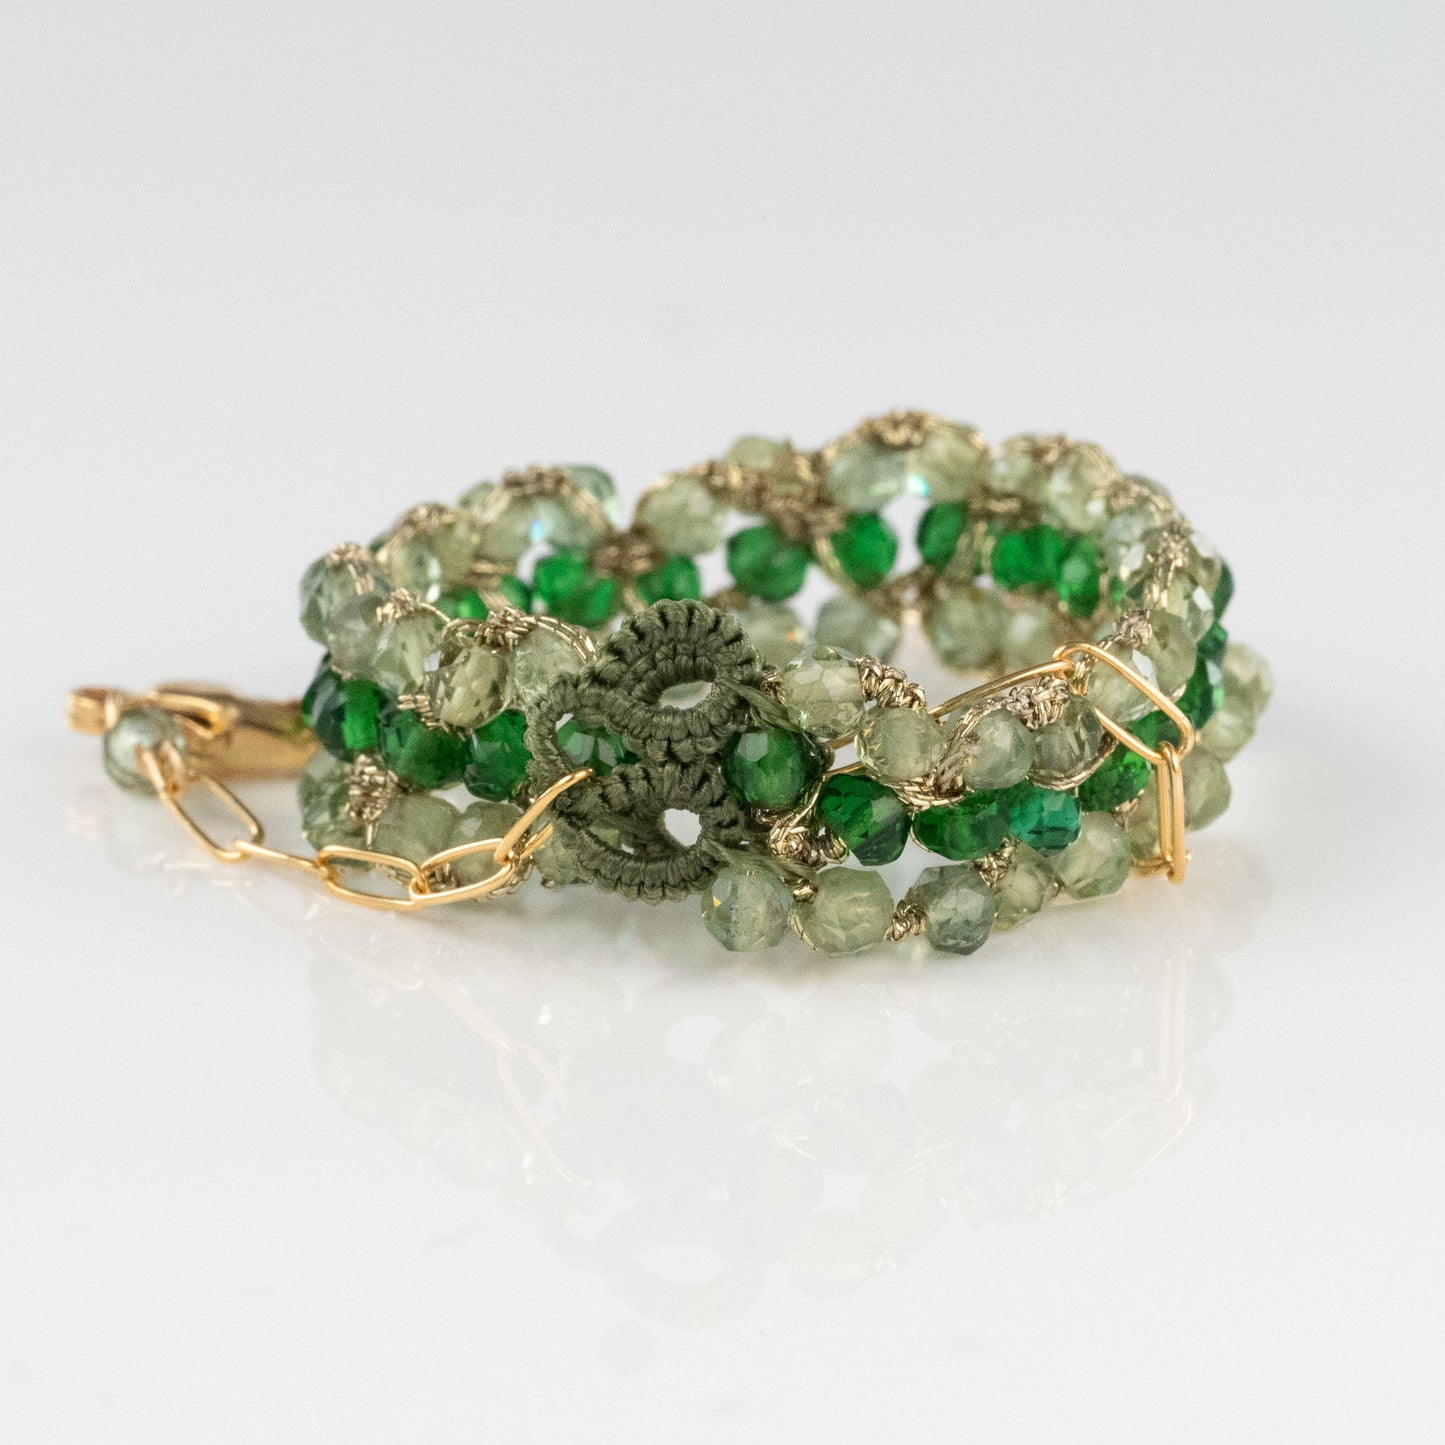 Load image into Gallery viewer, Danielle Welmond Petite Clover Closure Chrome Diopside and Green Amethyst Bracelet
